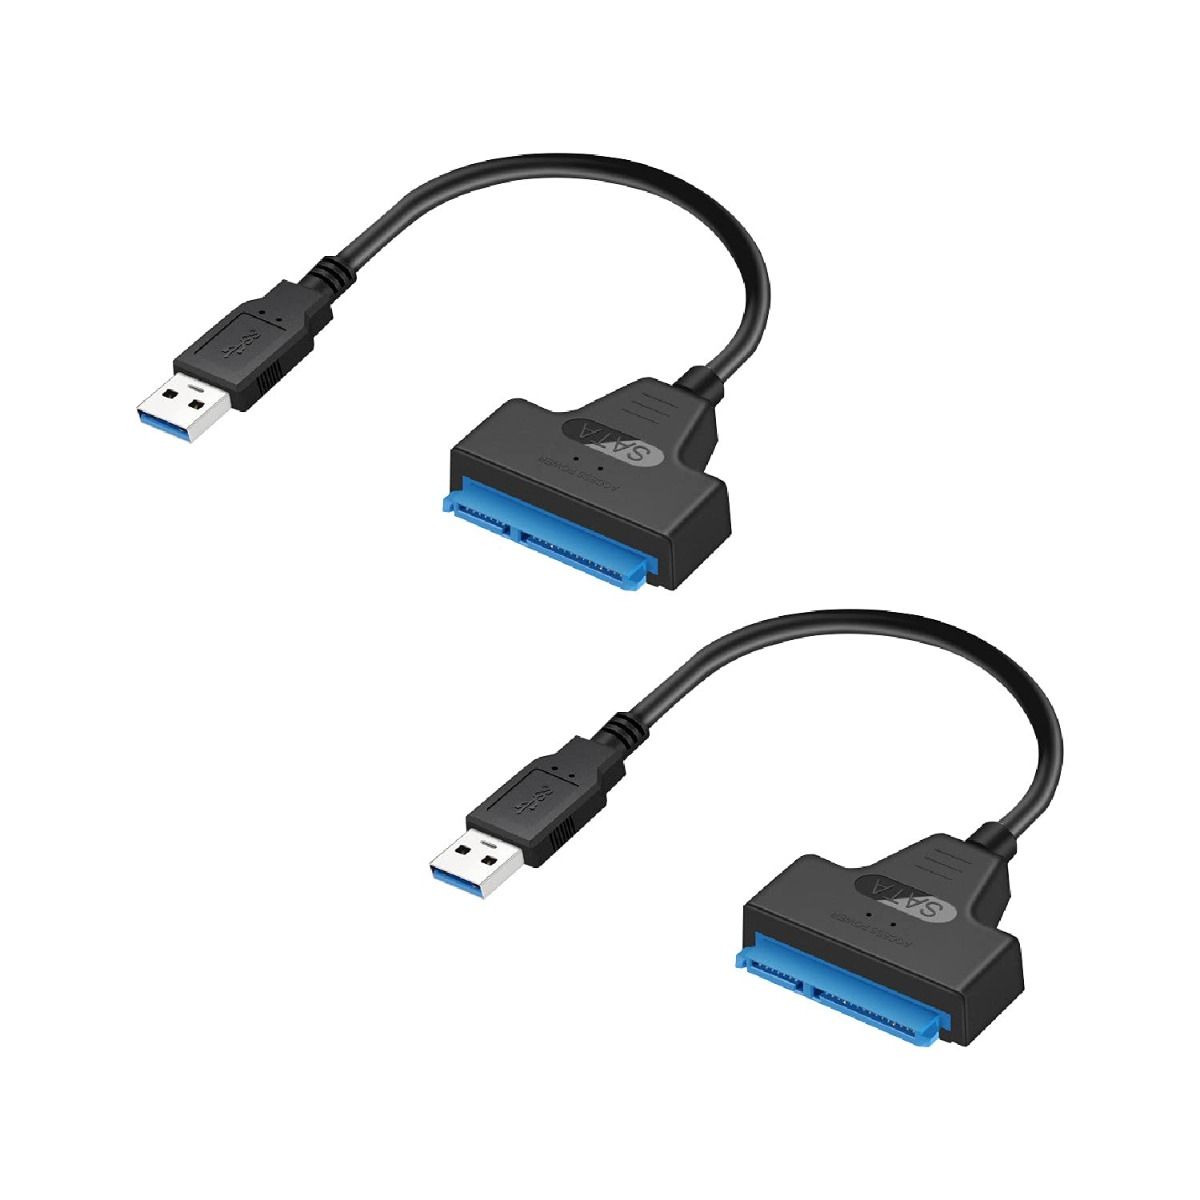 Altijd Lake Taupo Intens UCTRONICS SATA to USB Adapter Cable for Raspberry Pi, USB 3.0 to 2.5” SSD  External Converter, 2-Pack